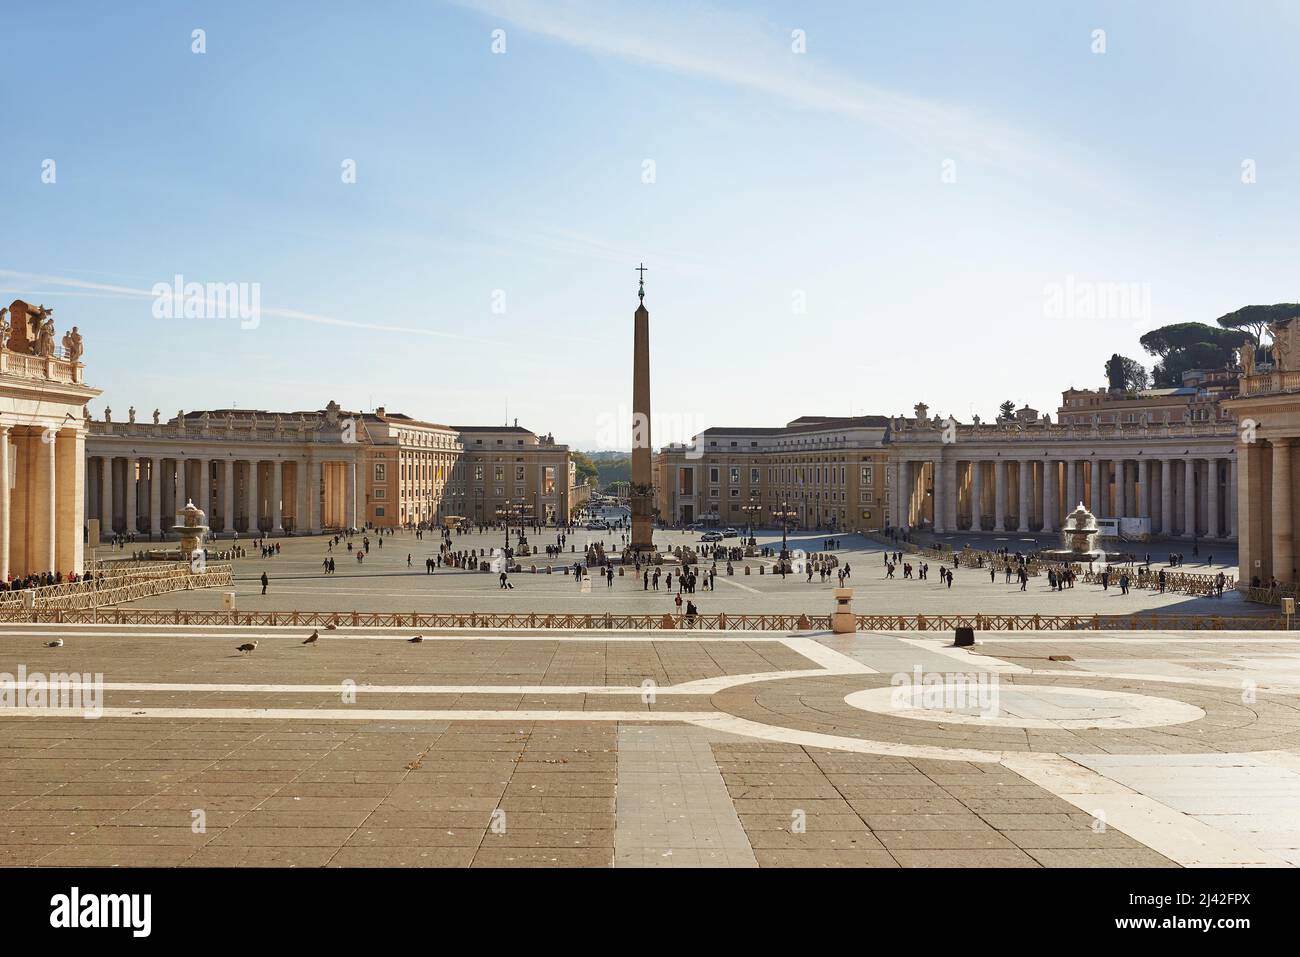 Vatican, Italy - October 16, 2021: View of St. Peter's Square in Vatican in sunny day Stock Photo